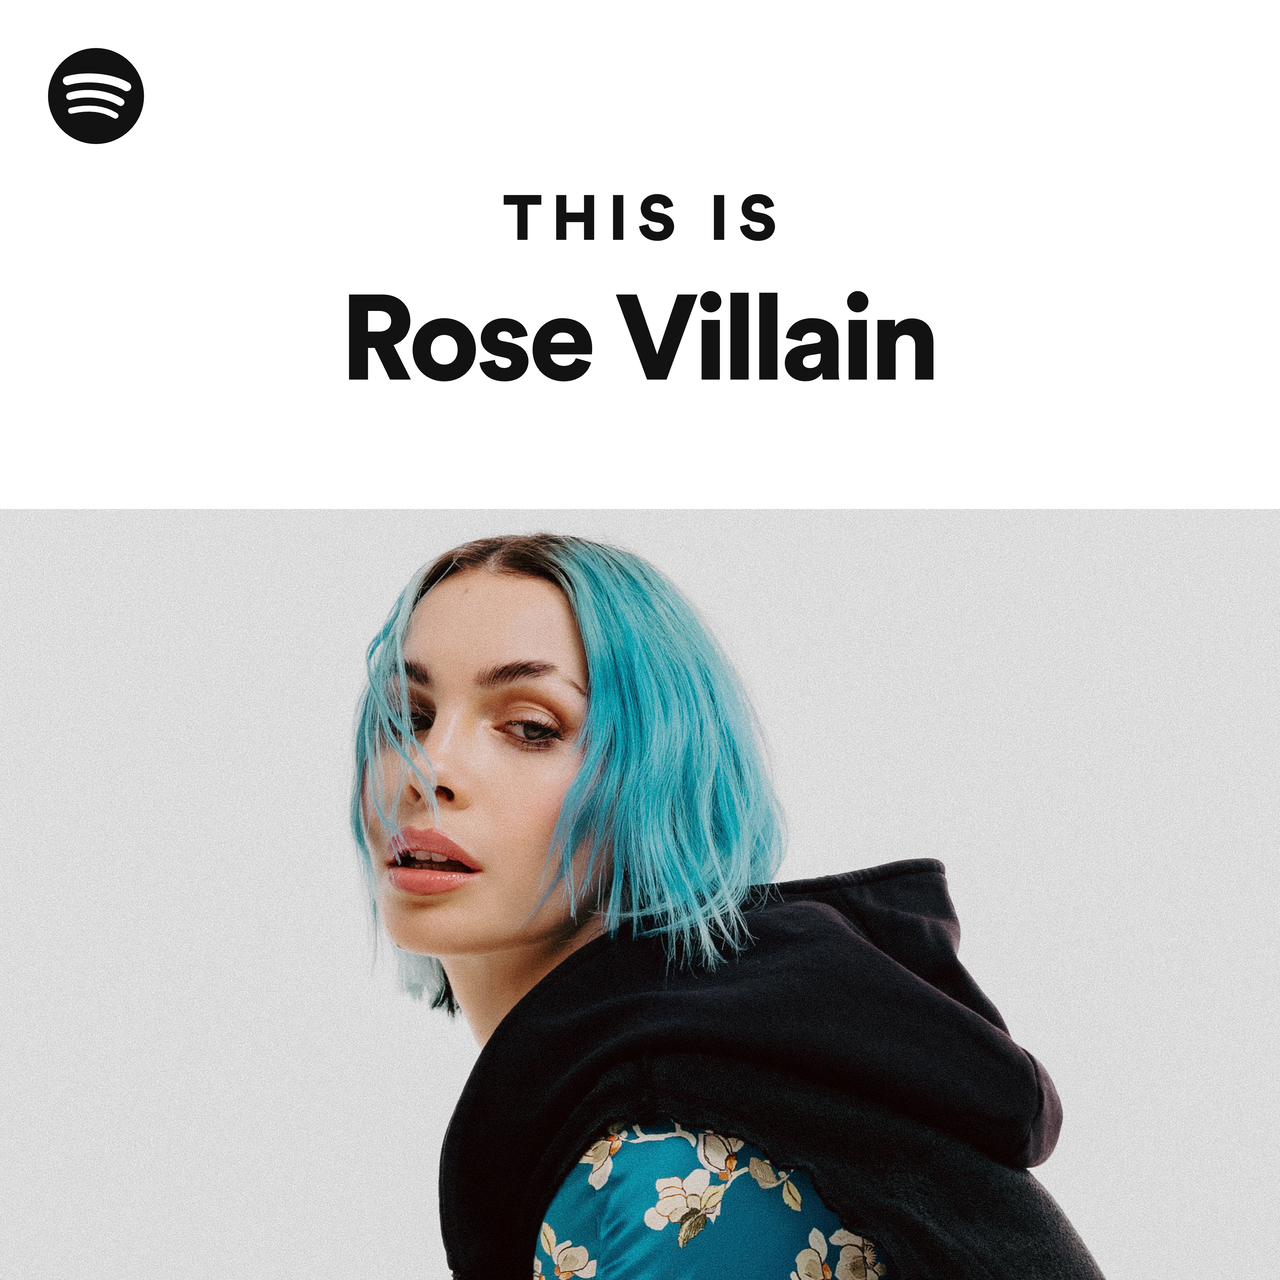 This Is Rose Villain - playlist by Spotify